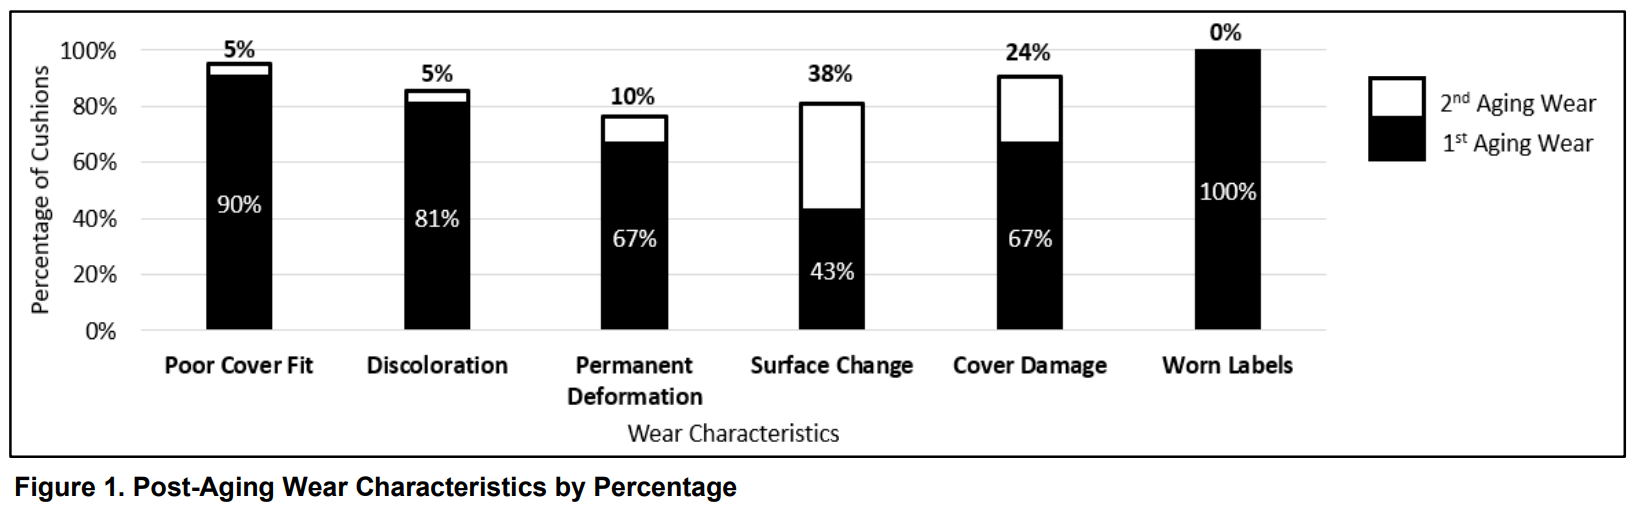 Figure 1. Post-Aging Wear Characteristics by Percentage